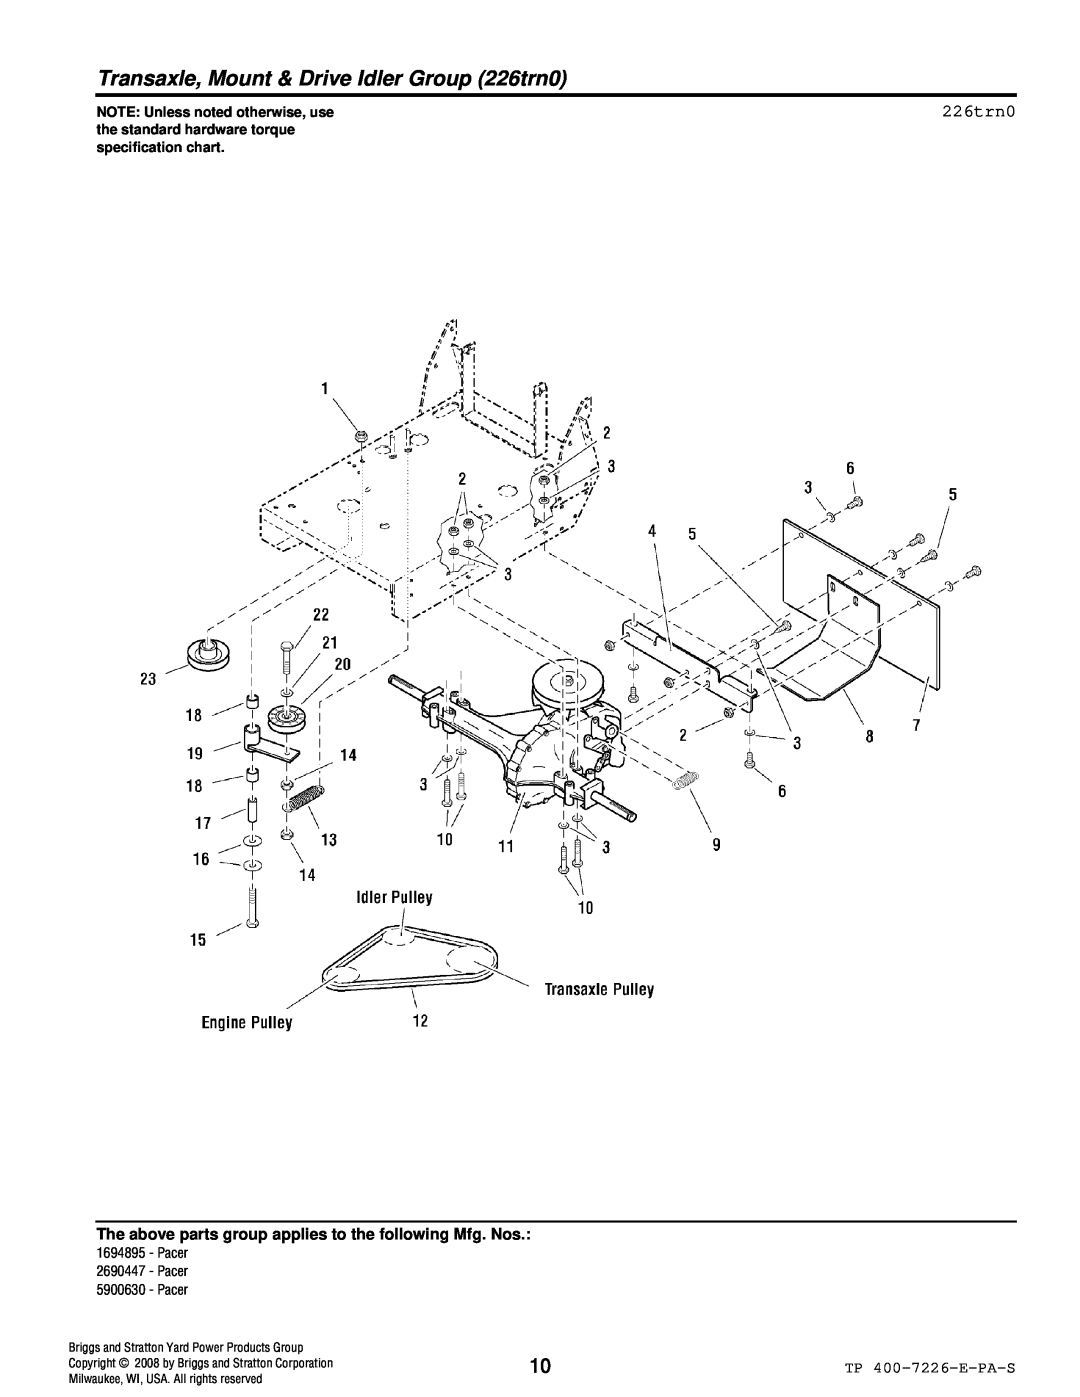 Simplicity Pacer manual Transaxle, Mount & Drive Idler Group 226trn0, NOTE Unless noted otherwise, use 